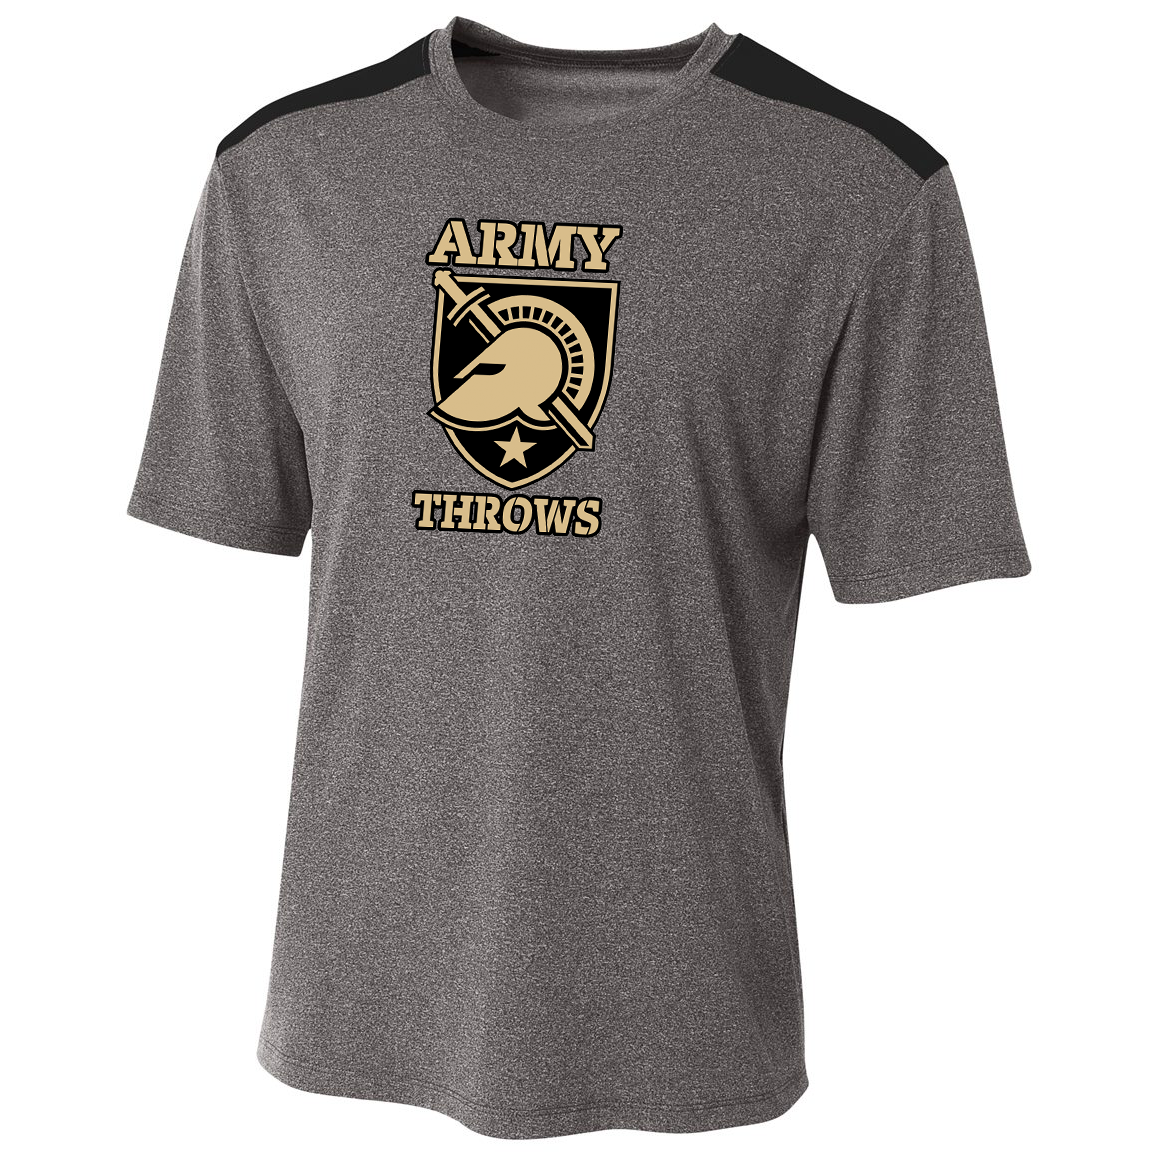 Army Throws A4 Color Block T-Shirt